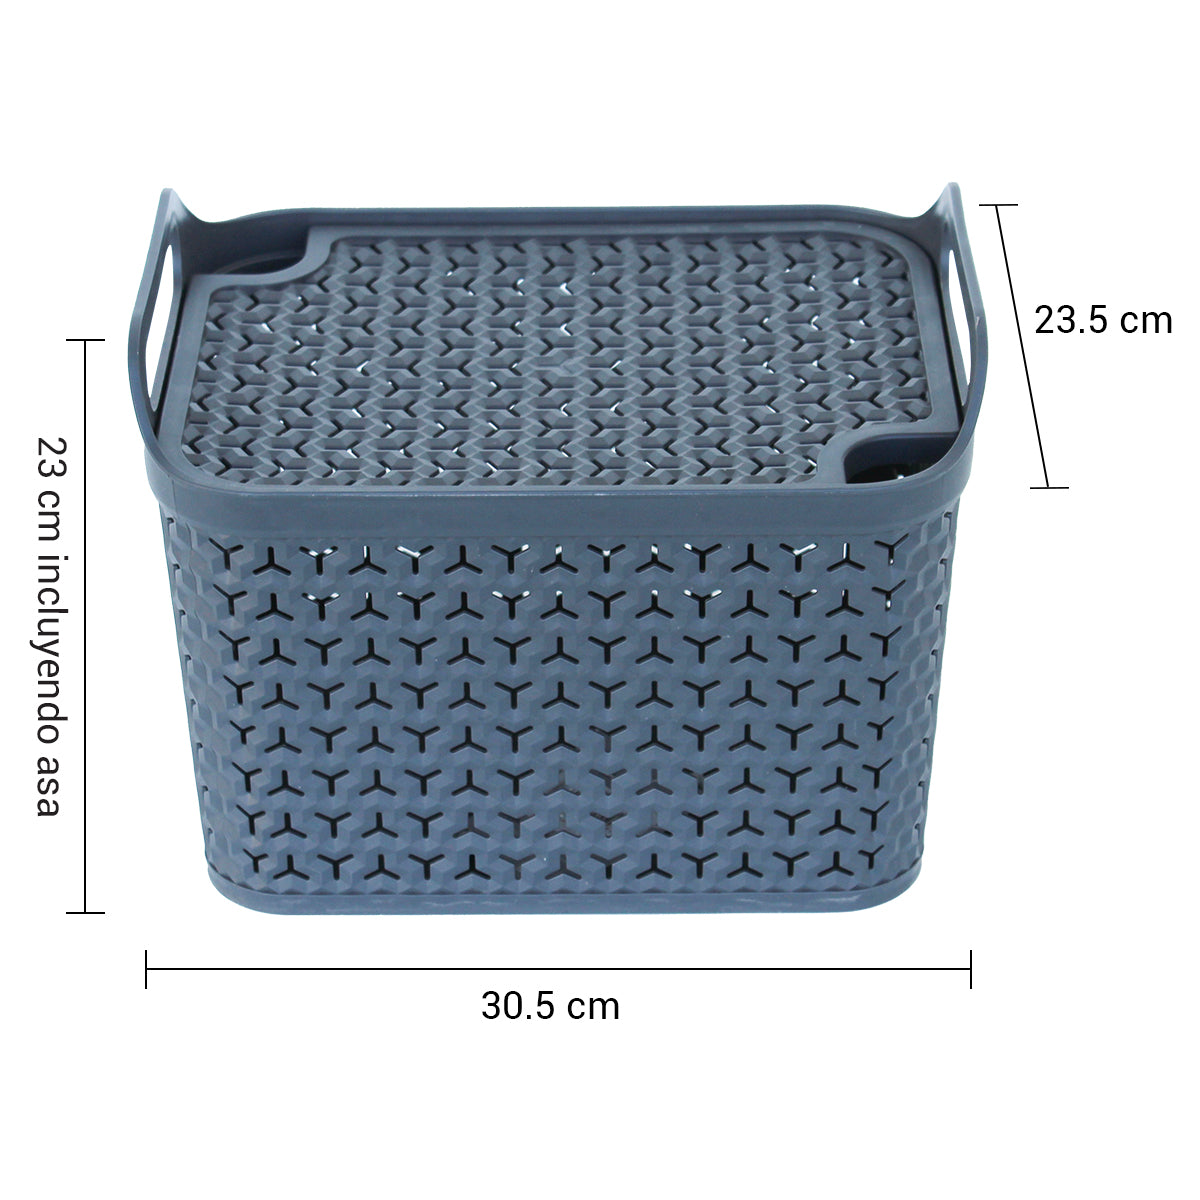 Stackable multi-purpose basket resistant basket made of recycled plastic Charcoal Gray Strata HW123